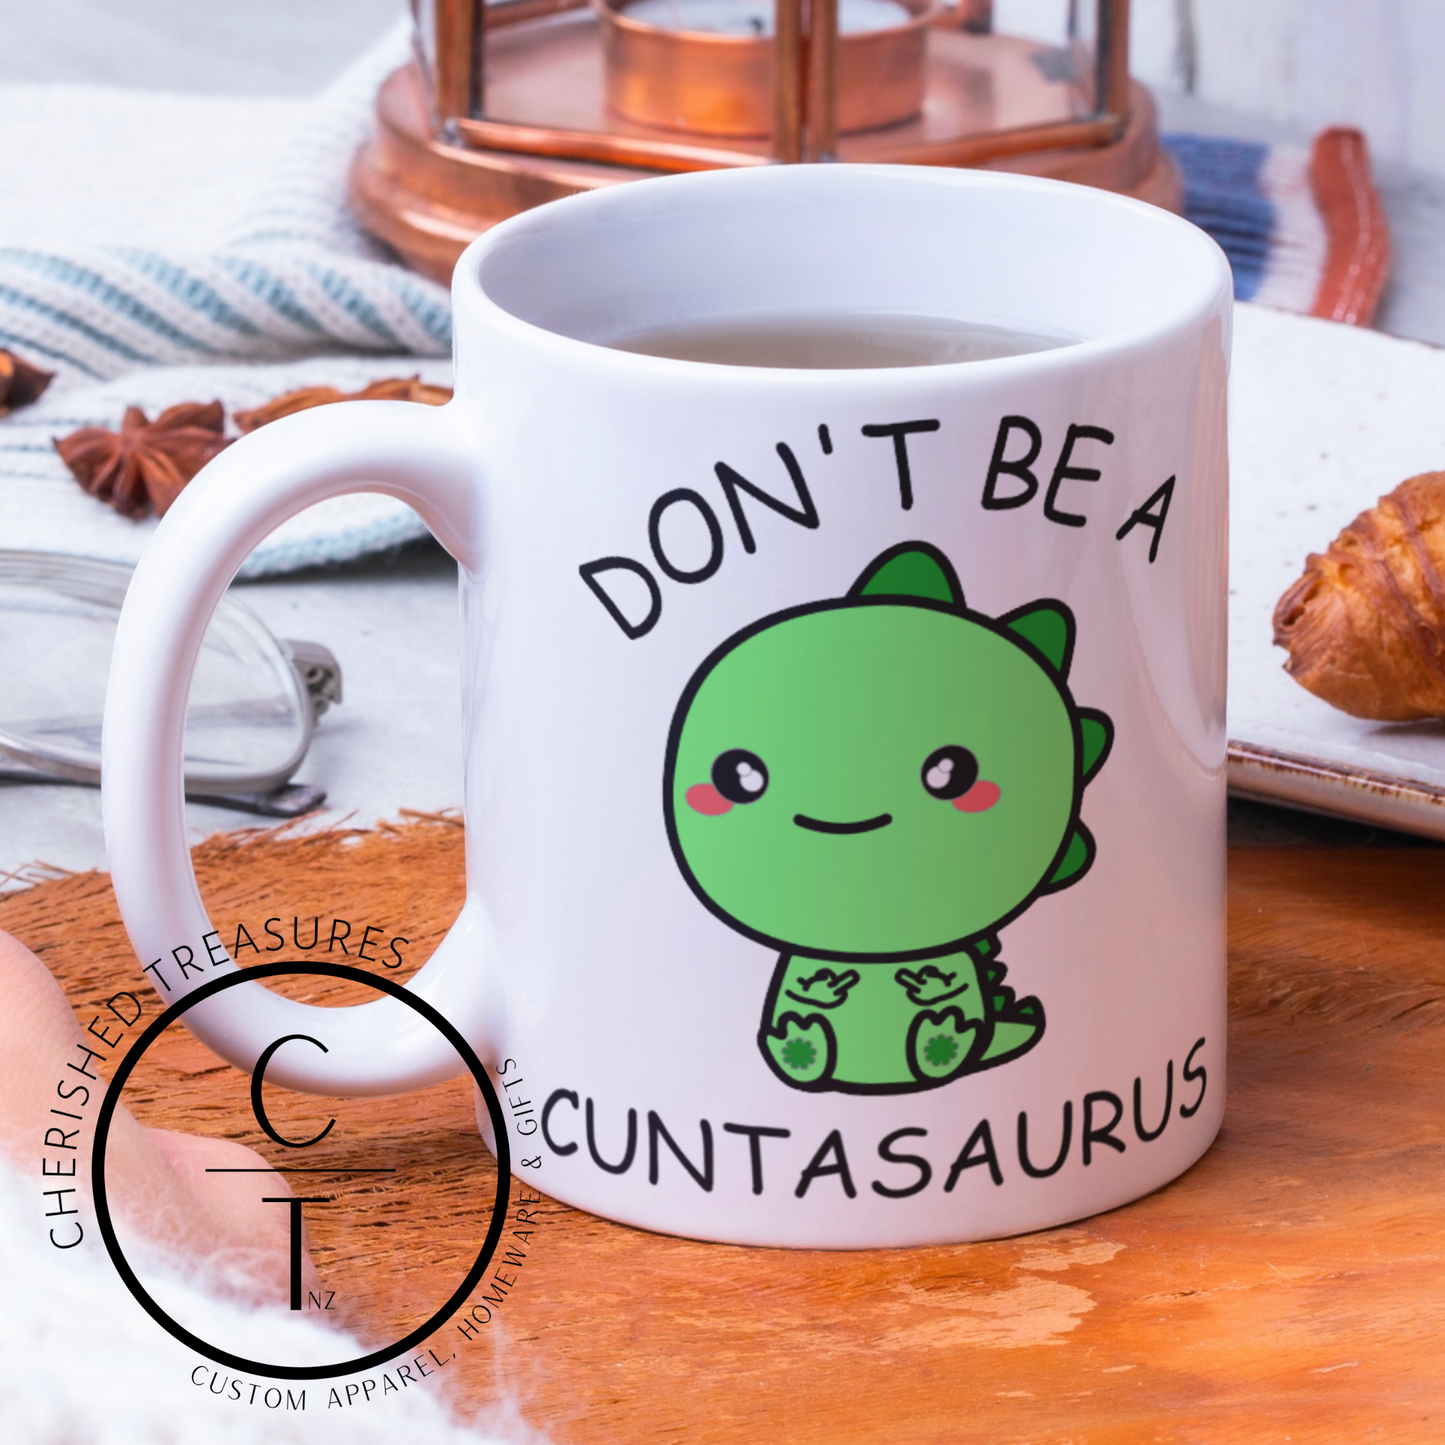 DON'T BE A CUNTASAURUS